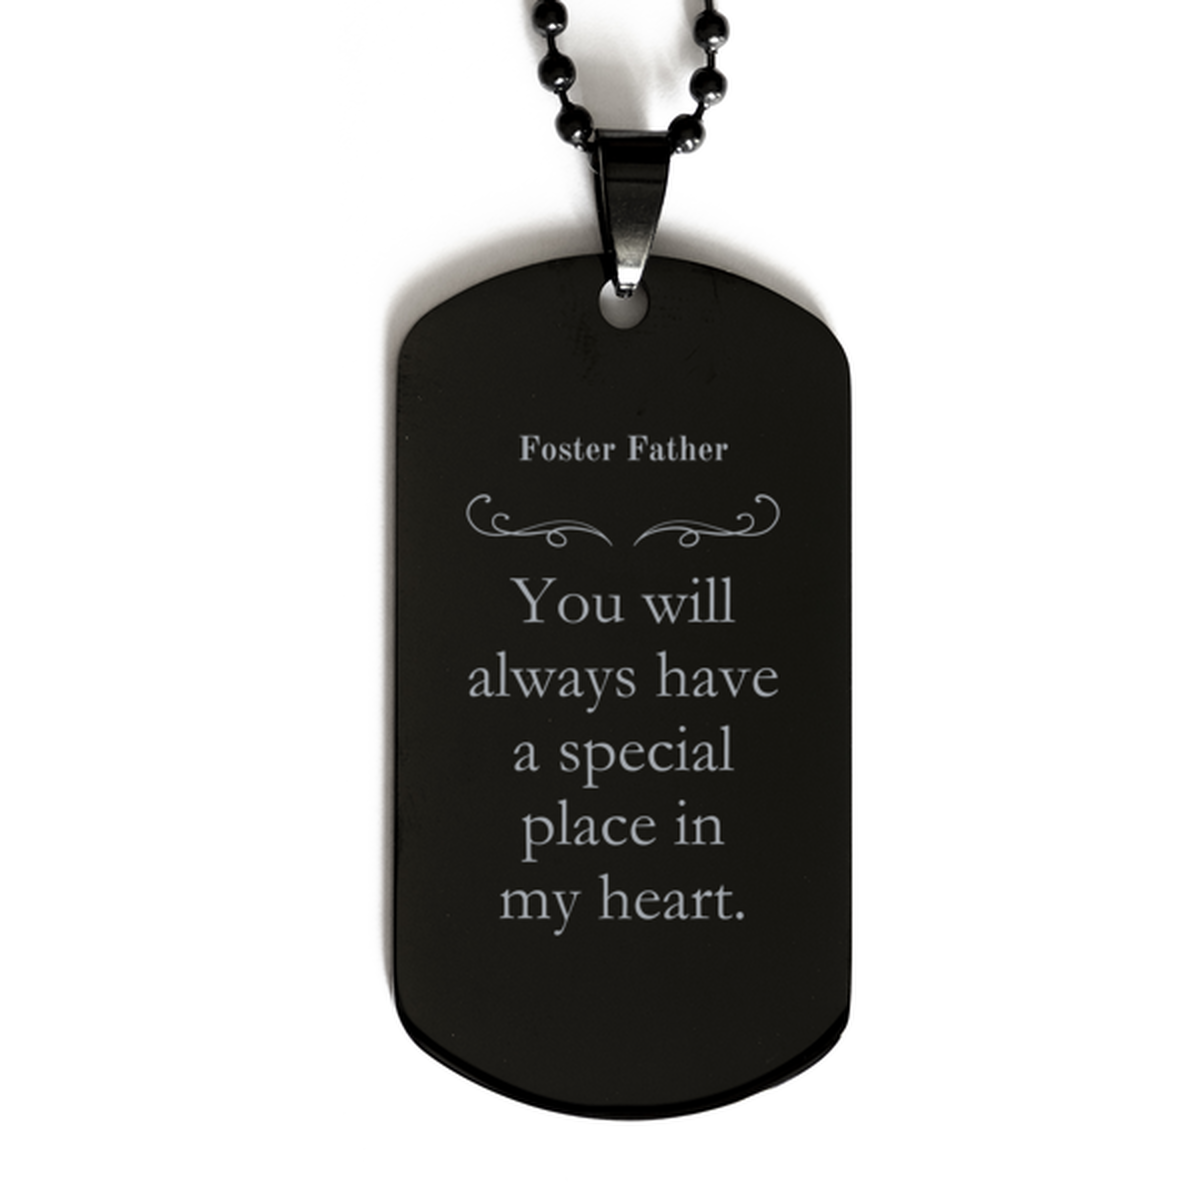 Black Dog Tag Foster Father You will always have a special place in my heart Engraved Gift for Fathers Day and Veterans Day